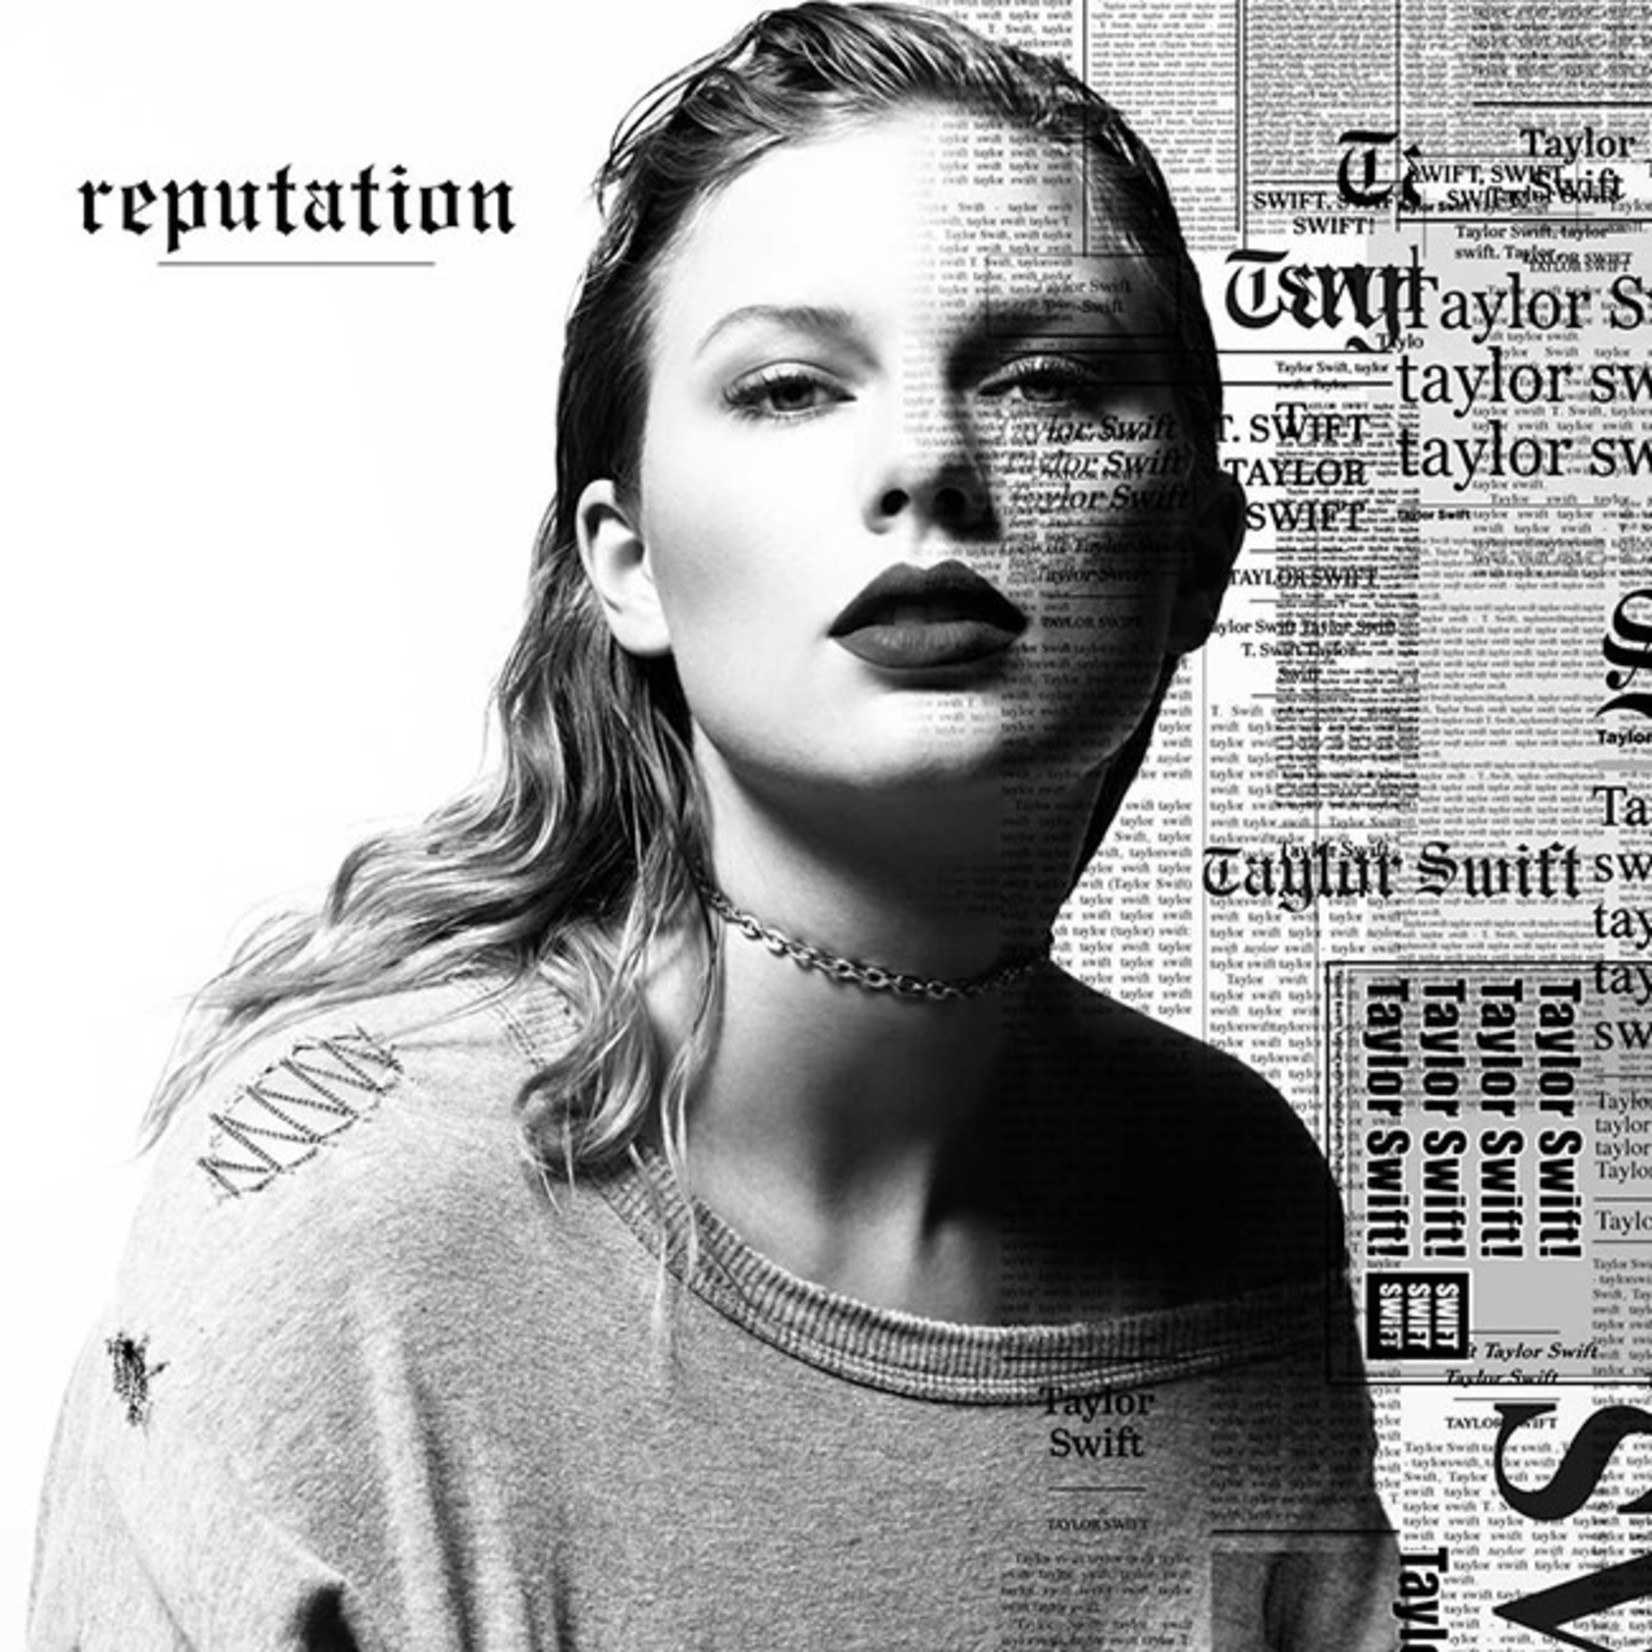 [New] Taylor Swift - Reputation (2LP, Picture Disc)